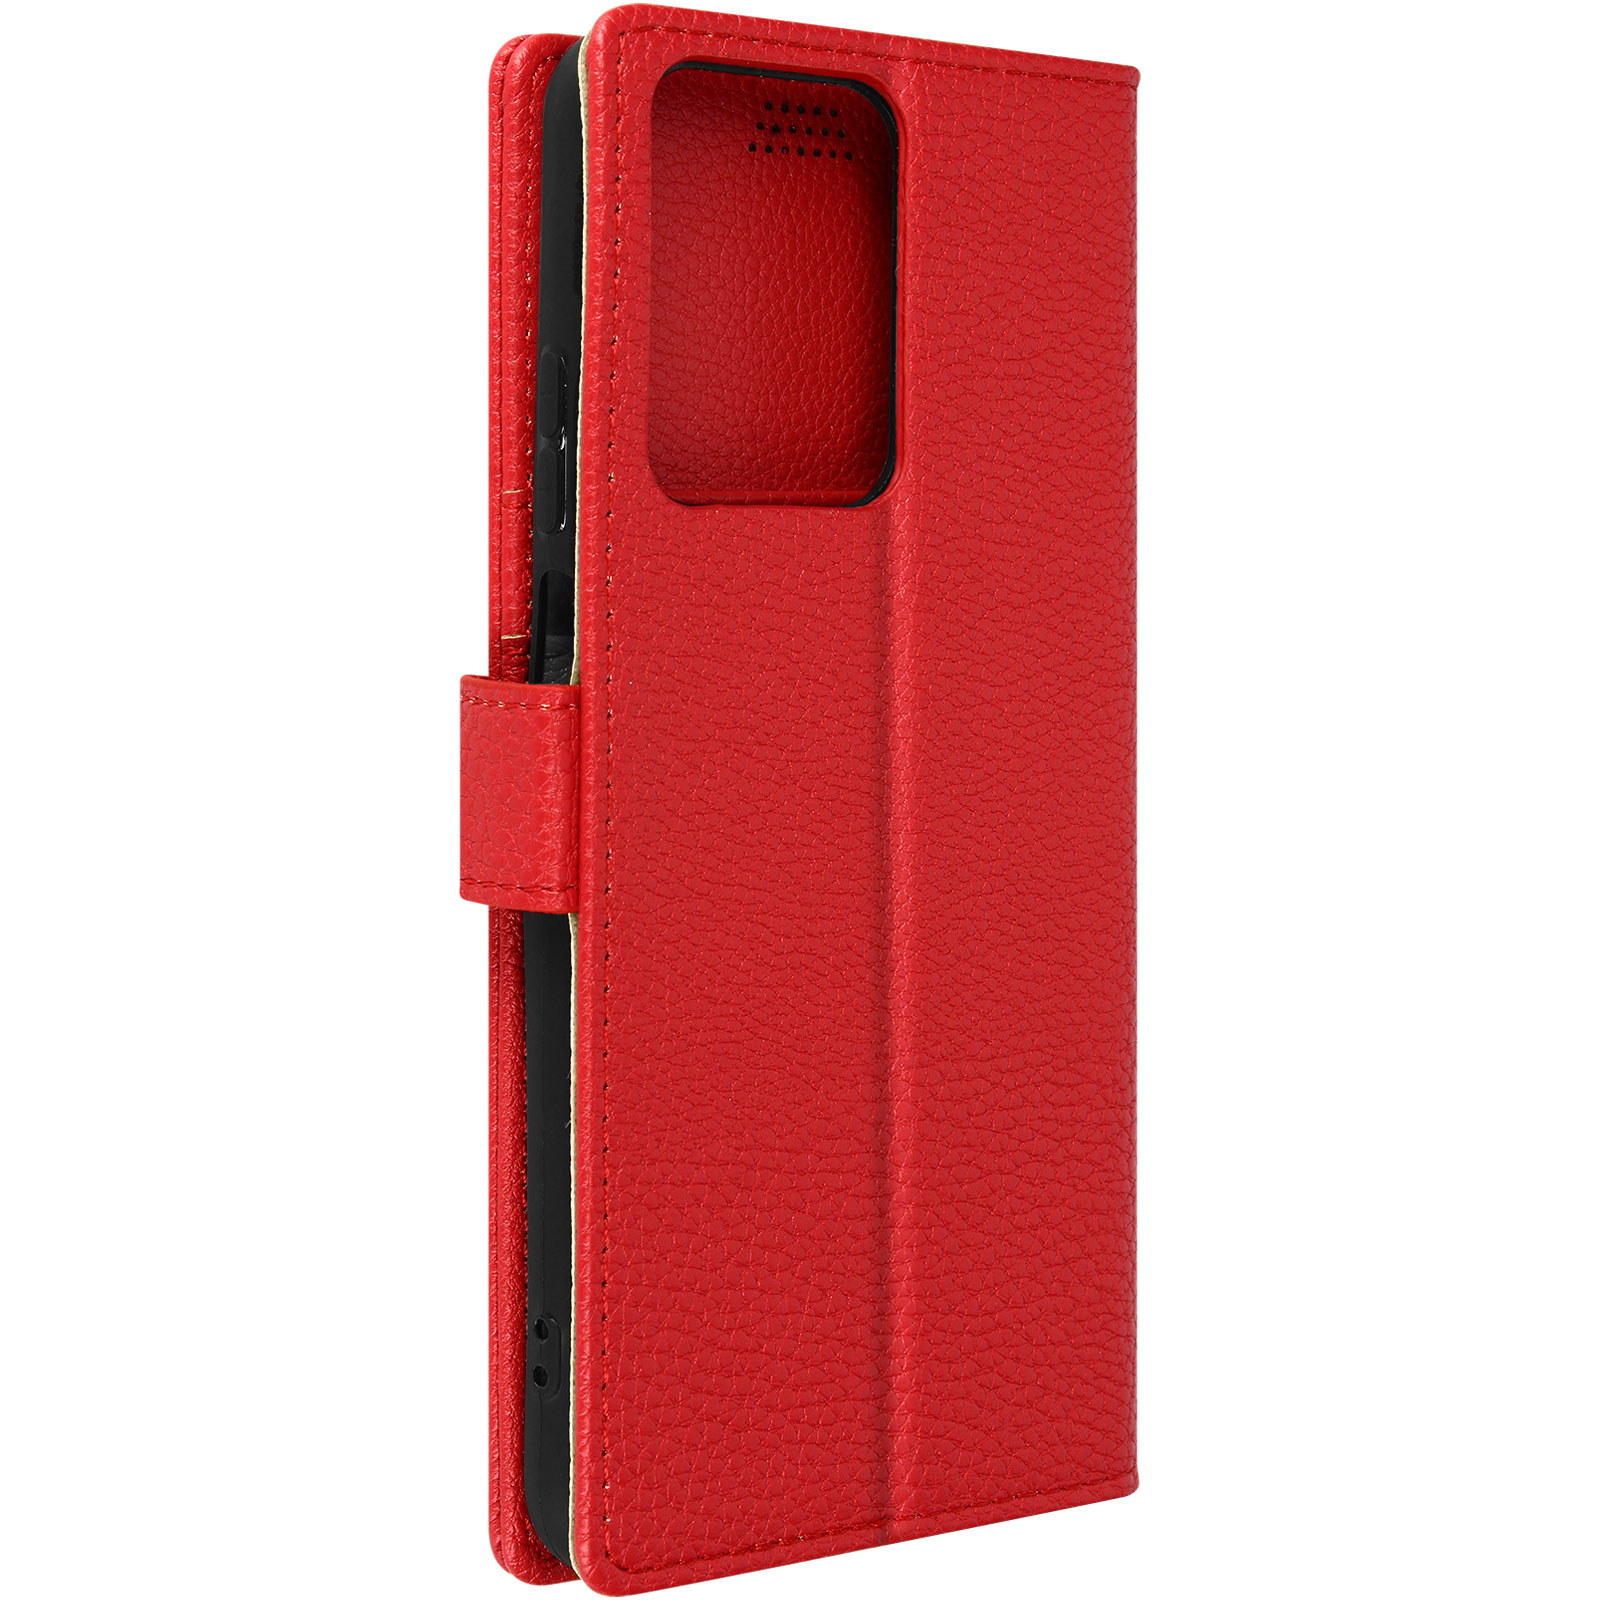 AVIZAR Lenny Honor Series, Rot Bookcover, Honor, X7a